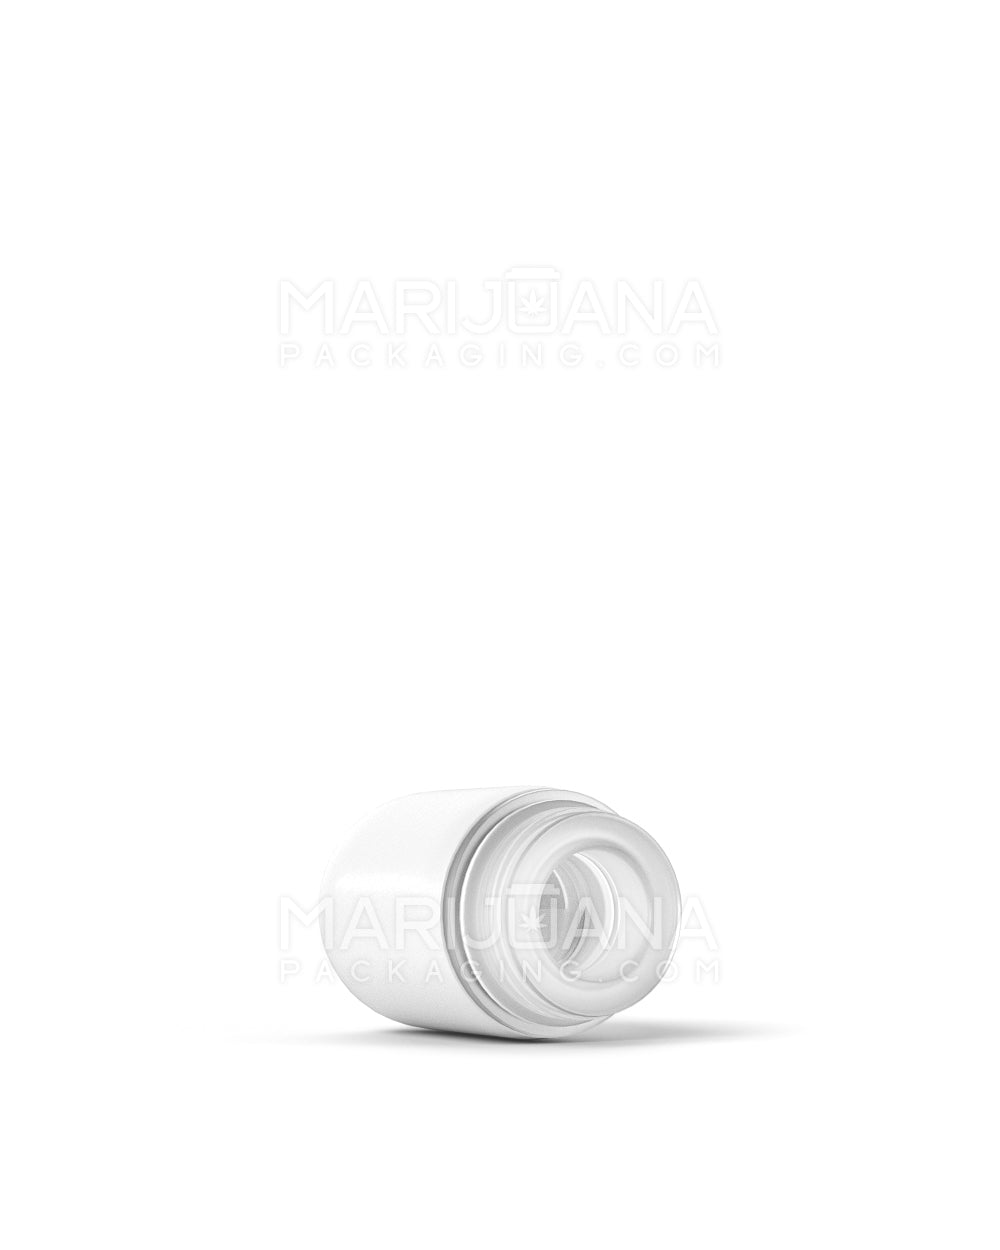 AVD | Round Vape Mouthpiece for Glass Cartridges | White Ceramic - Eazy Press - 600 Count - 6